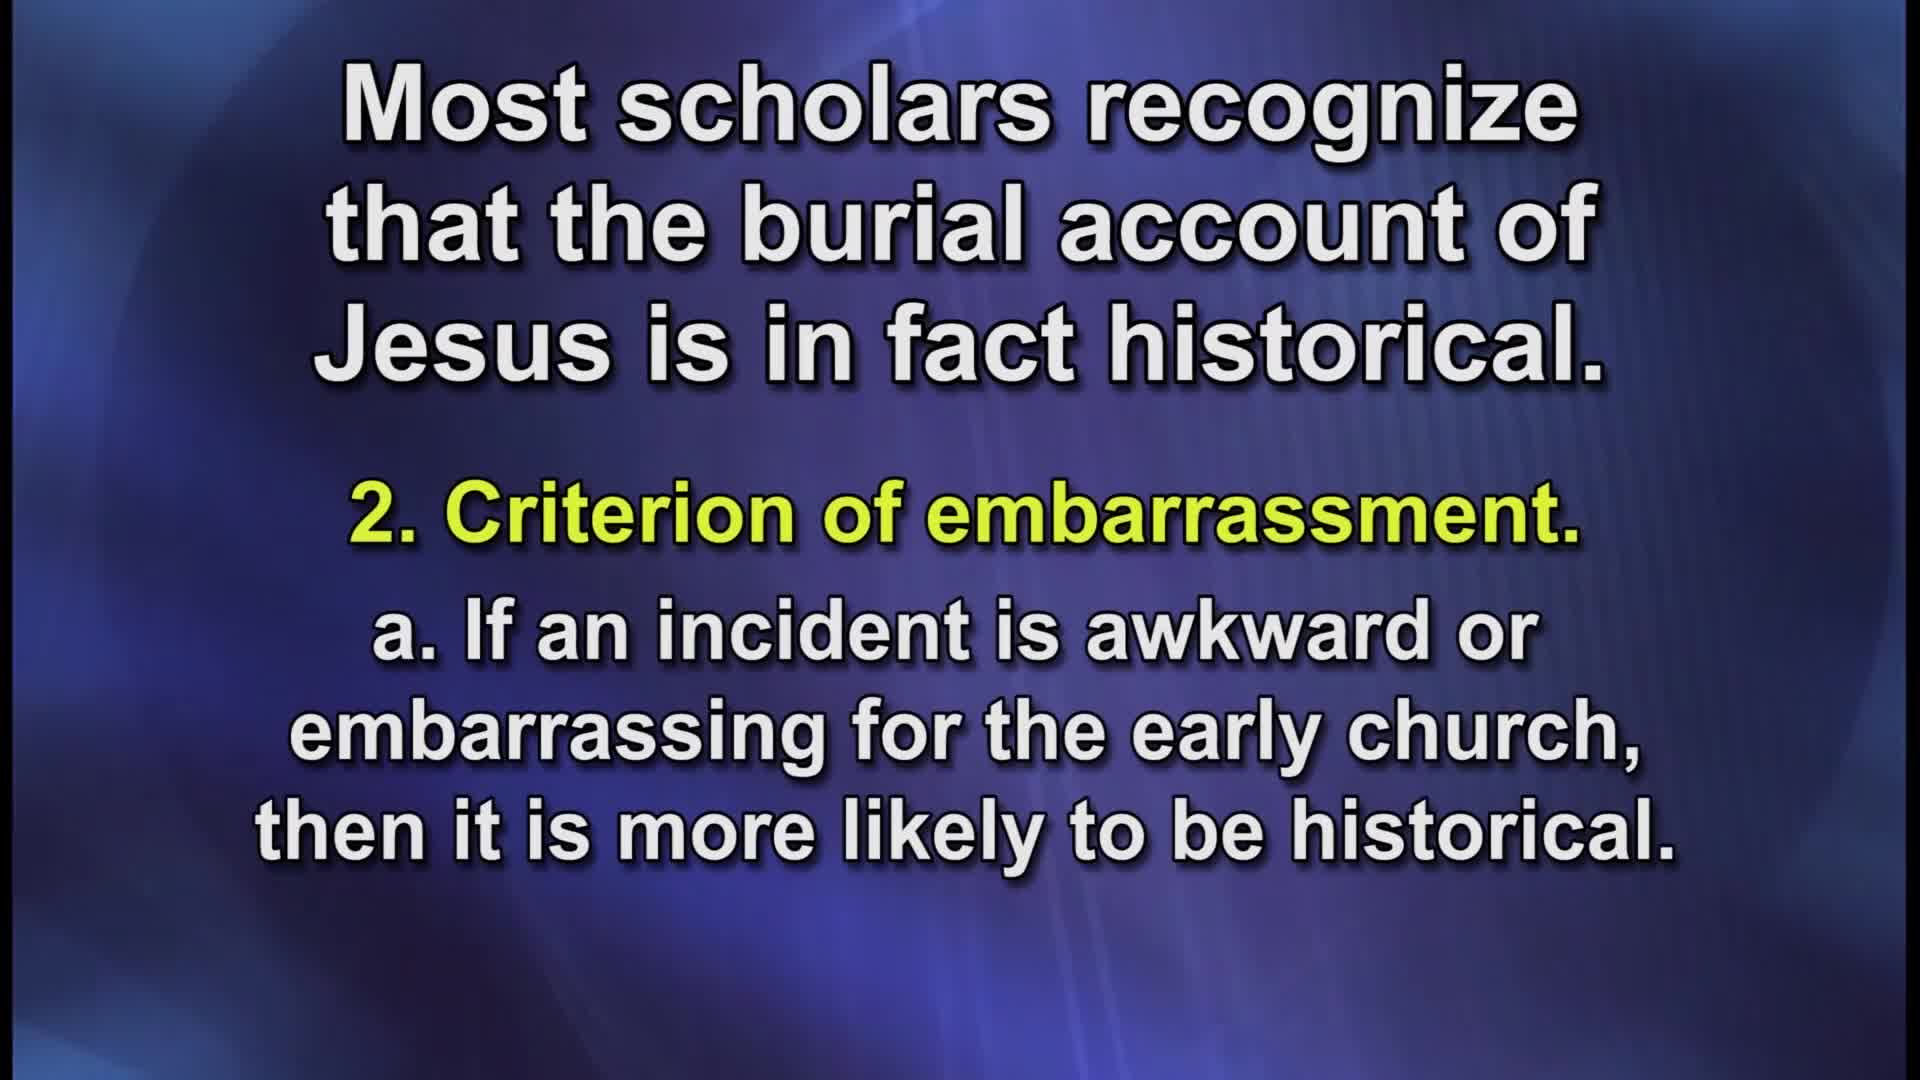 How does the criterion of embarrassment support the honorable burial of Jesus?